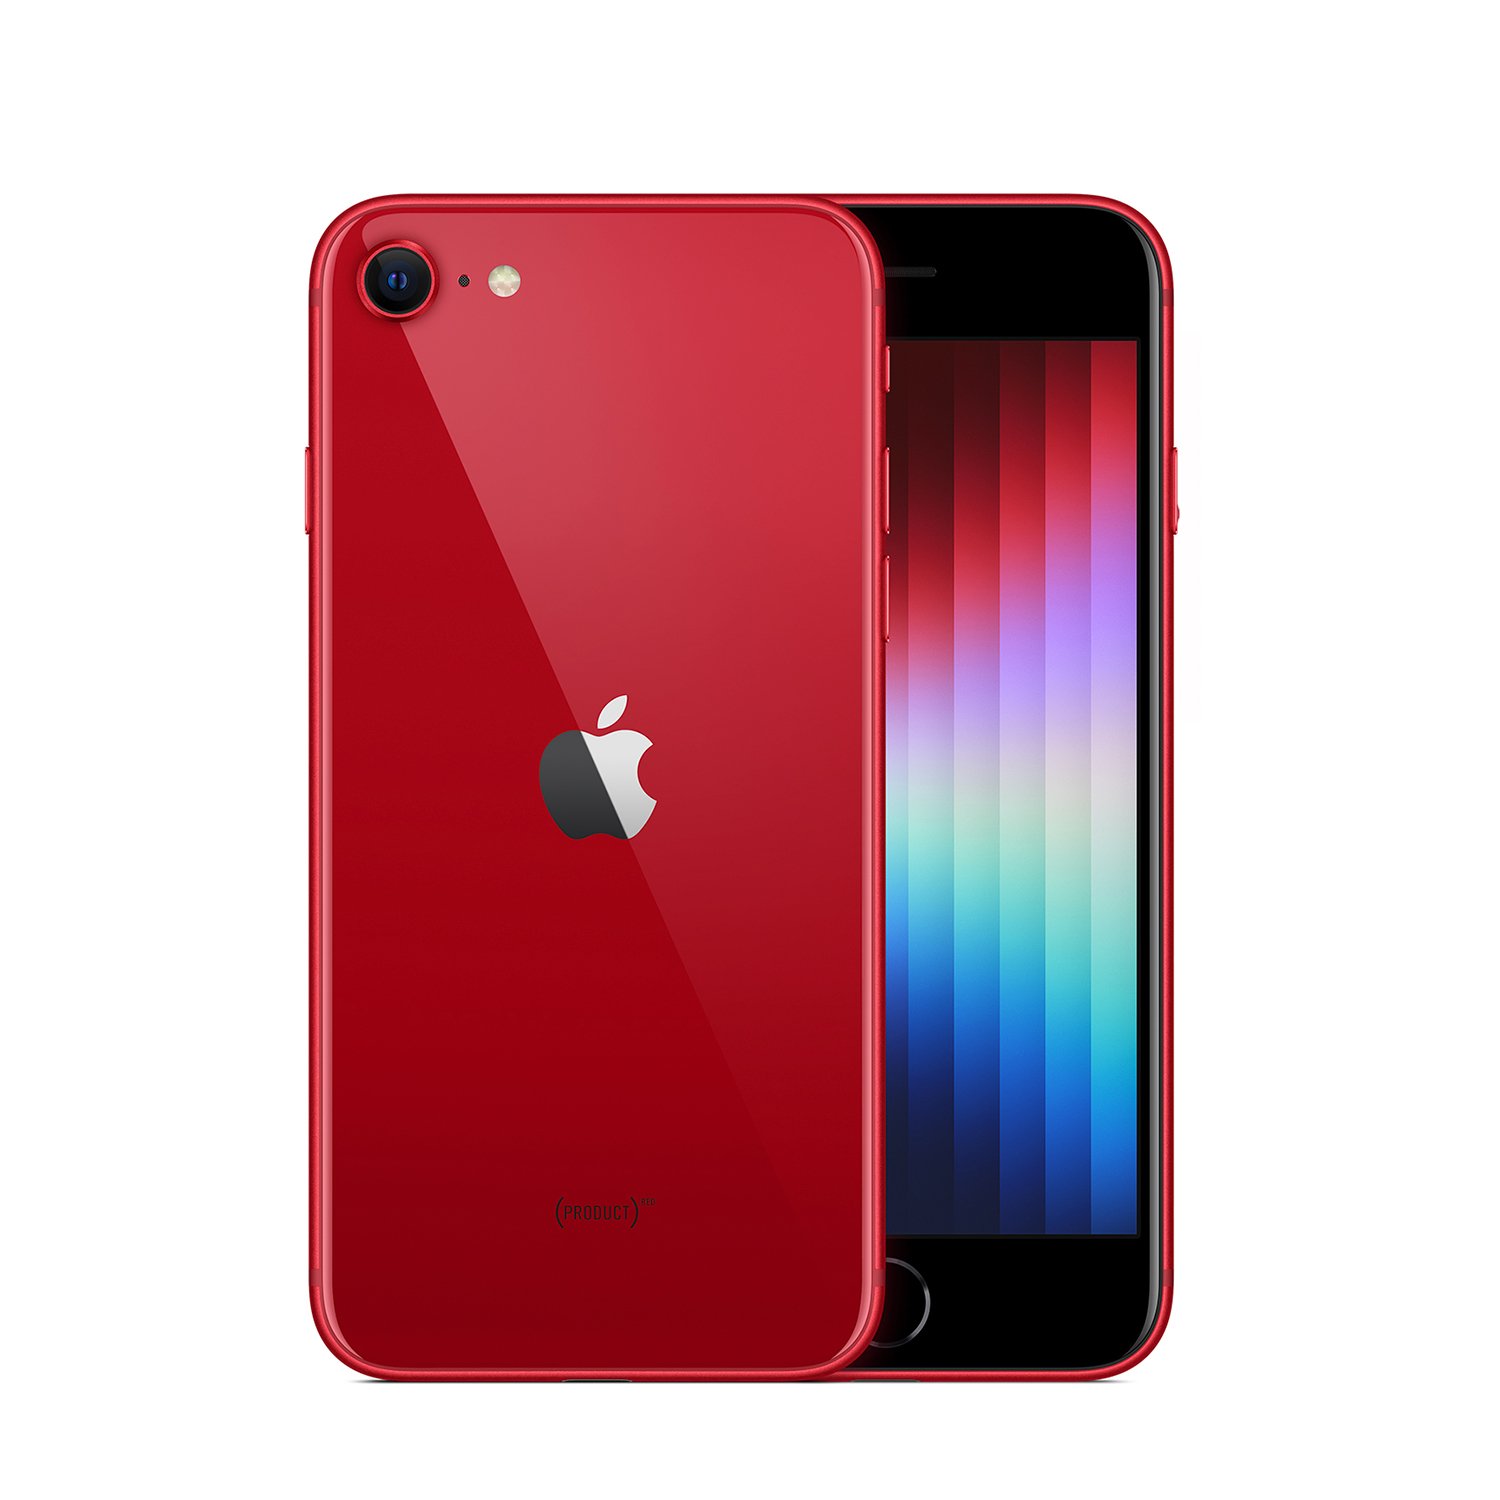 Se products. Iphone se 2022 Red. Iphone 12 product Red. Айфон се 2022 128 ГБ красный. Iphone se 2022 128gb product(Red).